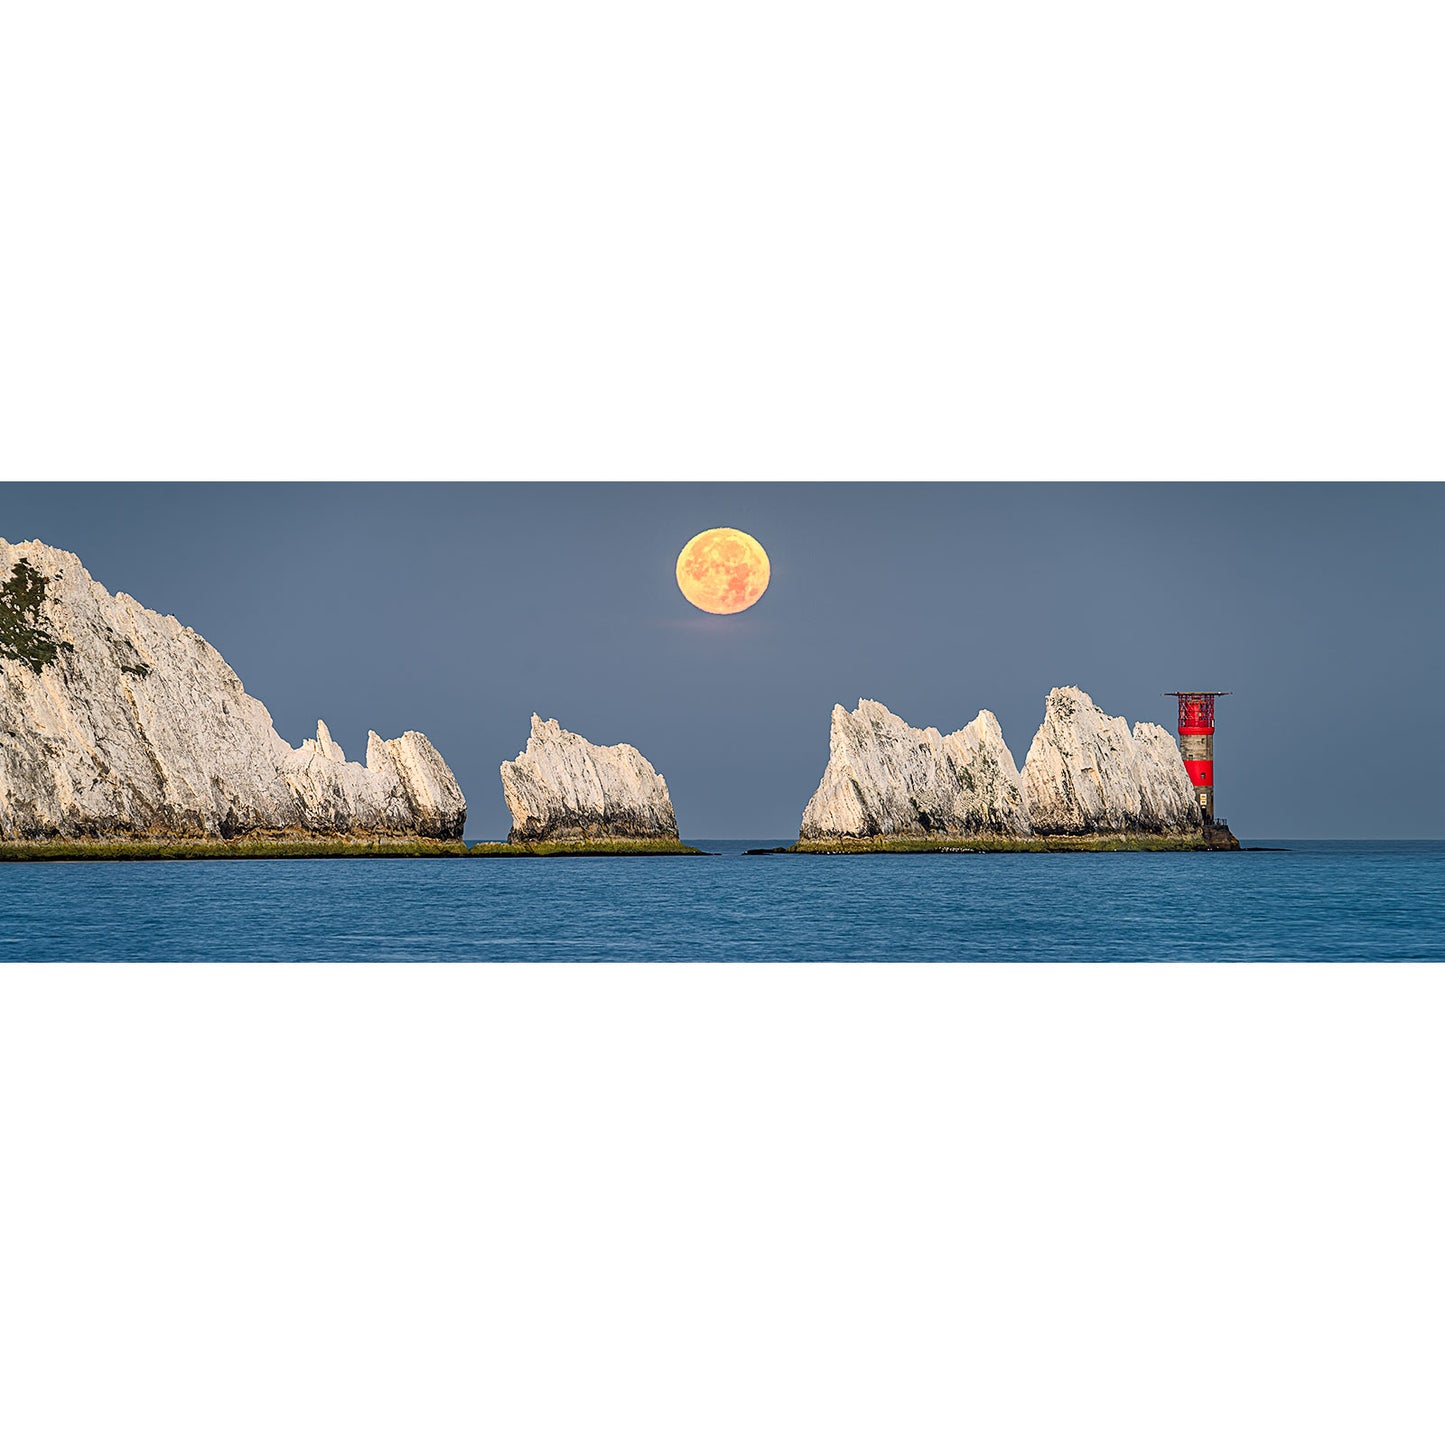 Moonset at The Needles - Available Light Photography